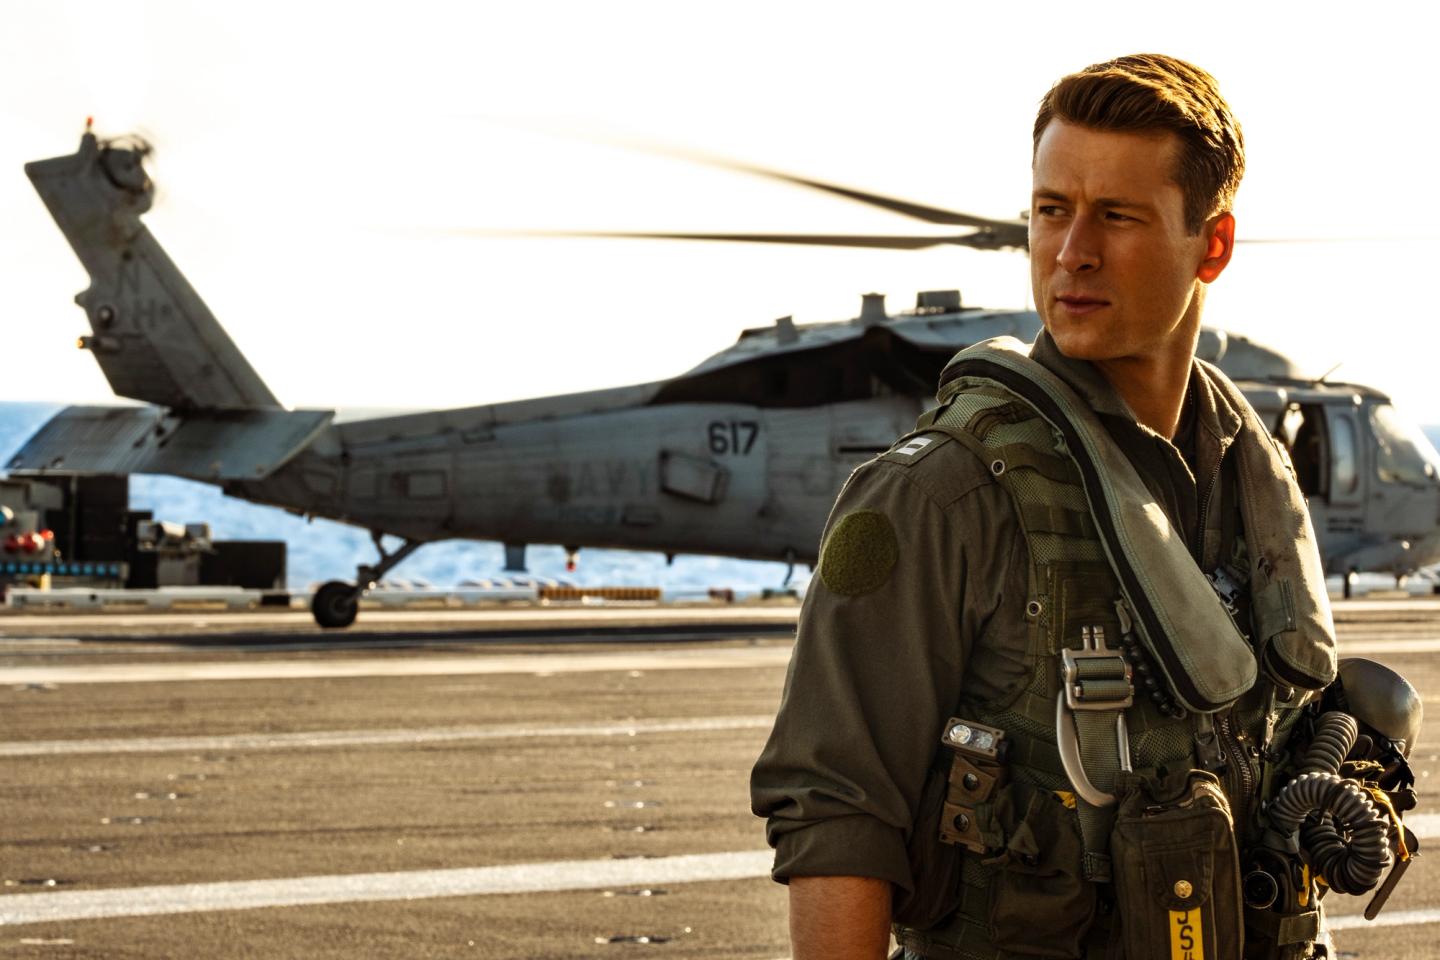 Glen Powell in uniform standing in front of a helicopter